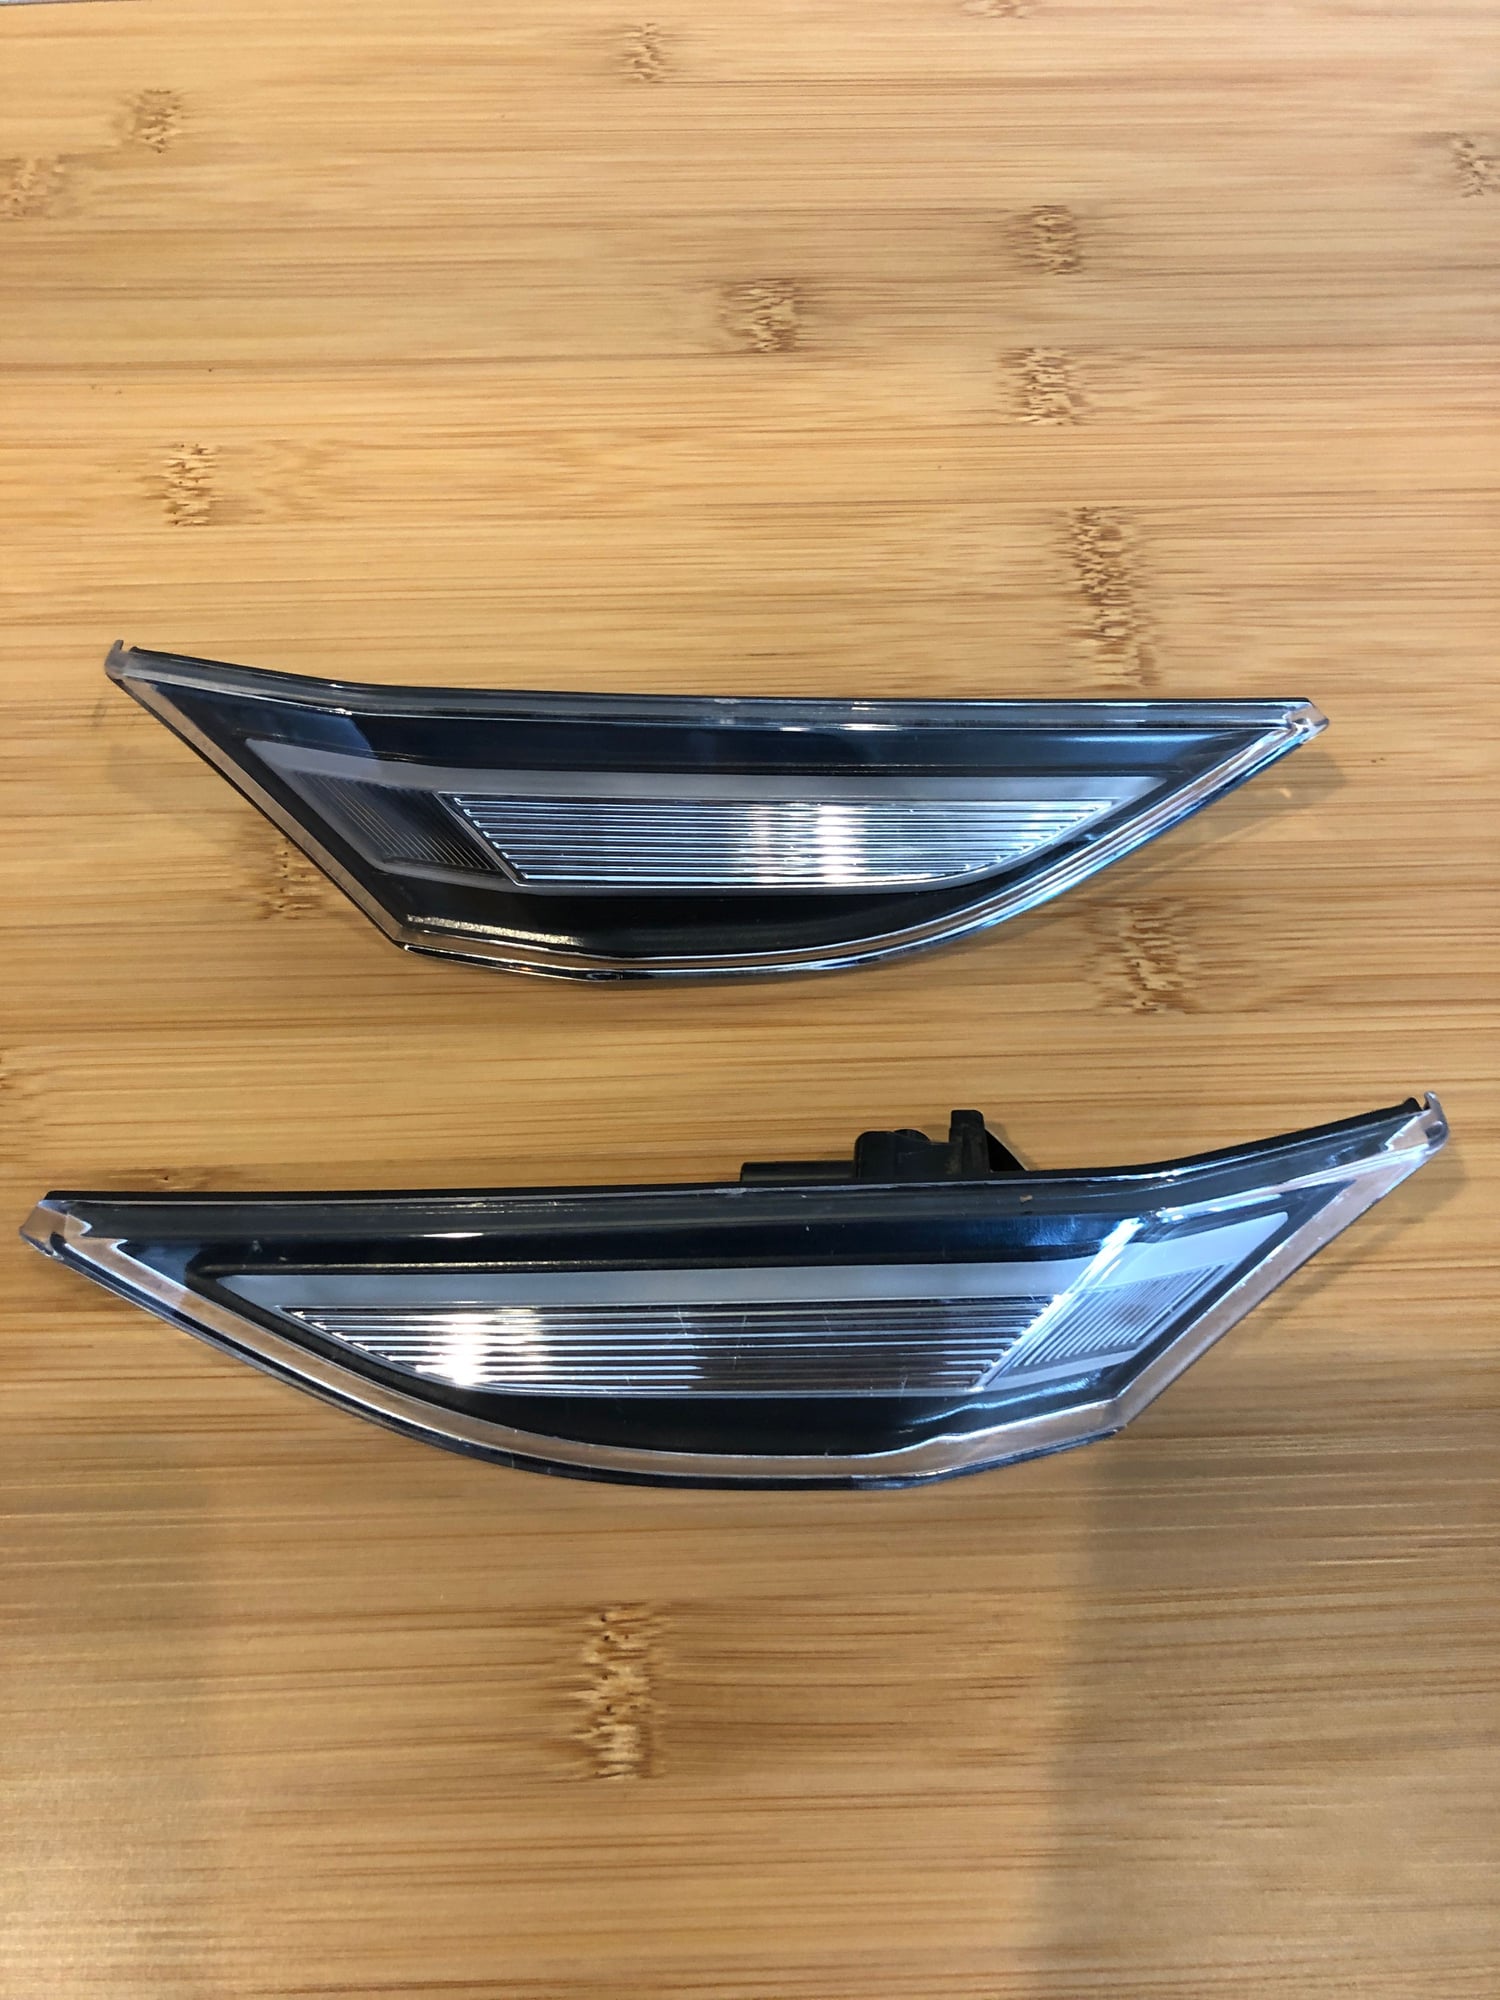 2000 Porsche 911 - LED clear sidemarkers - Lights - $75 - Seattle, WA 98103, United States